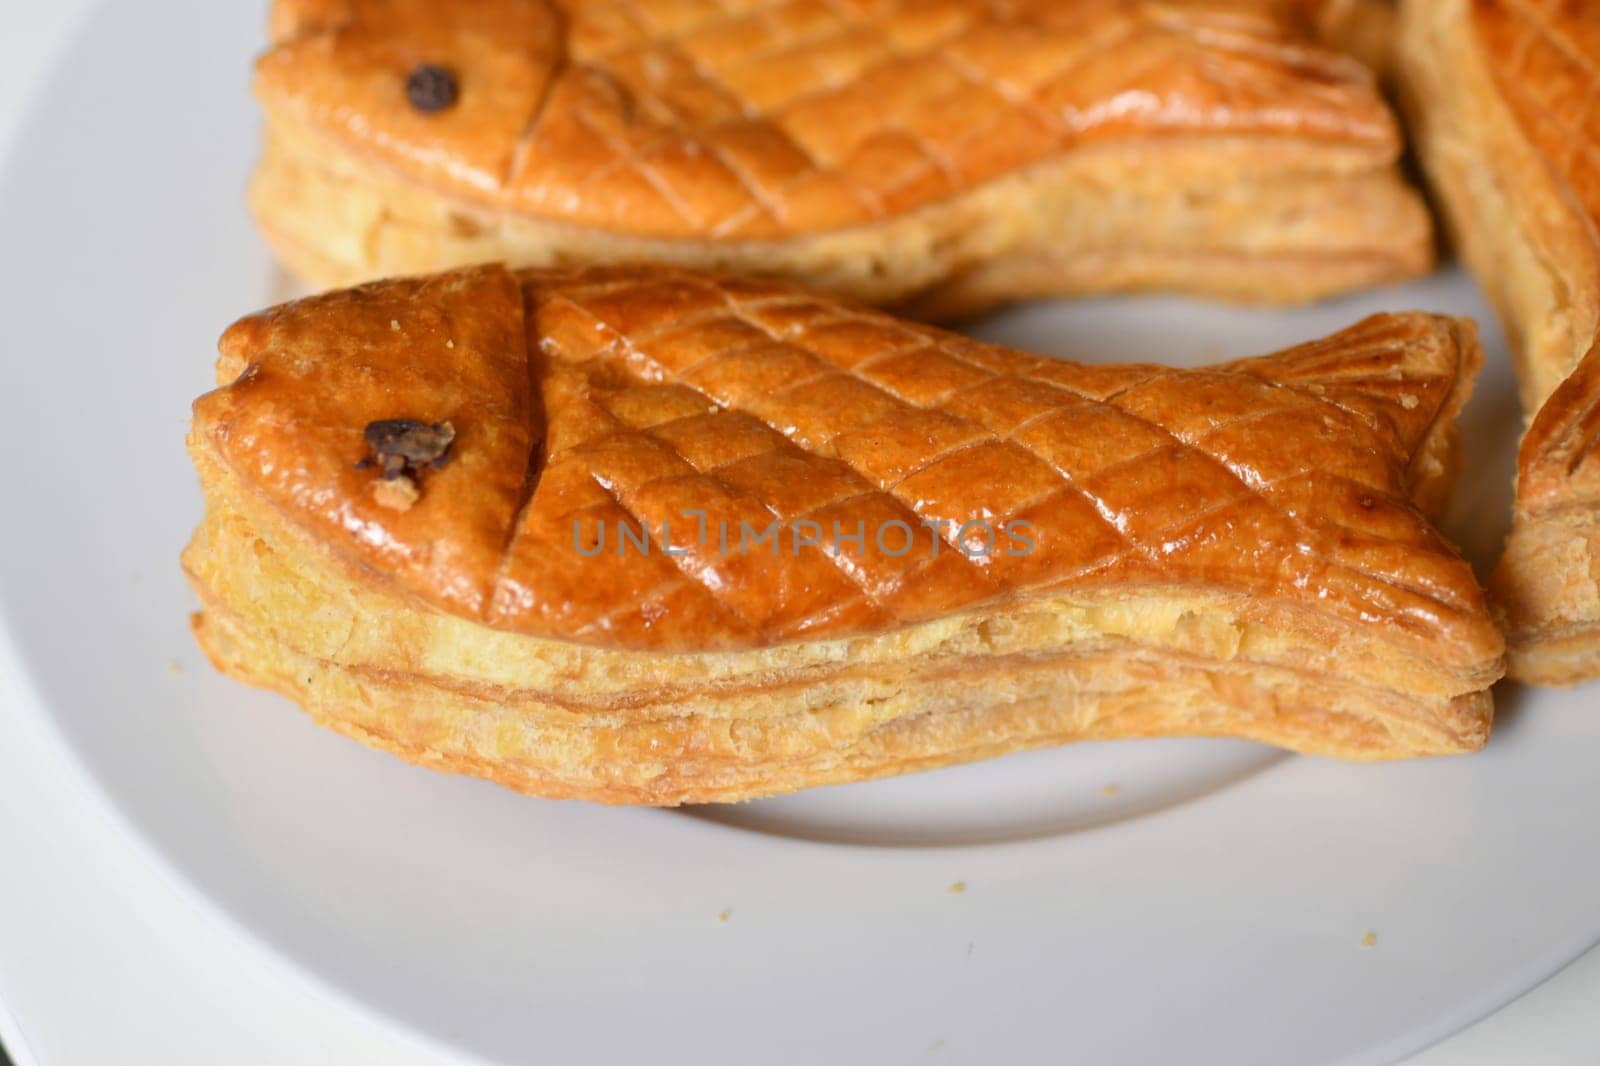 The fishes from puff pastry in the store on April Fool's Day by Godi